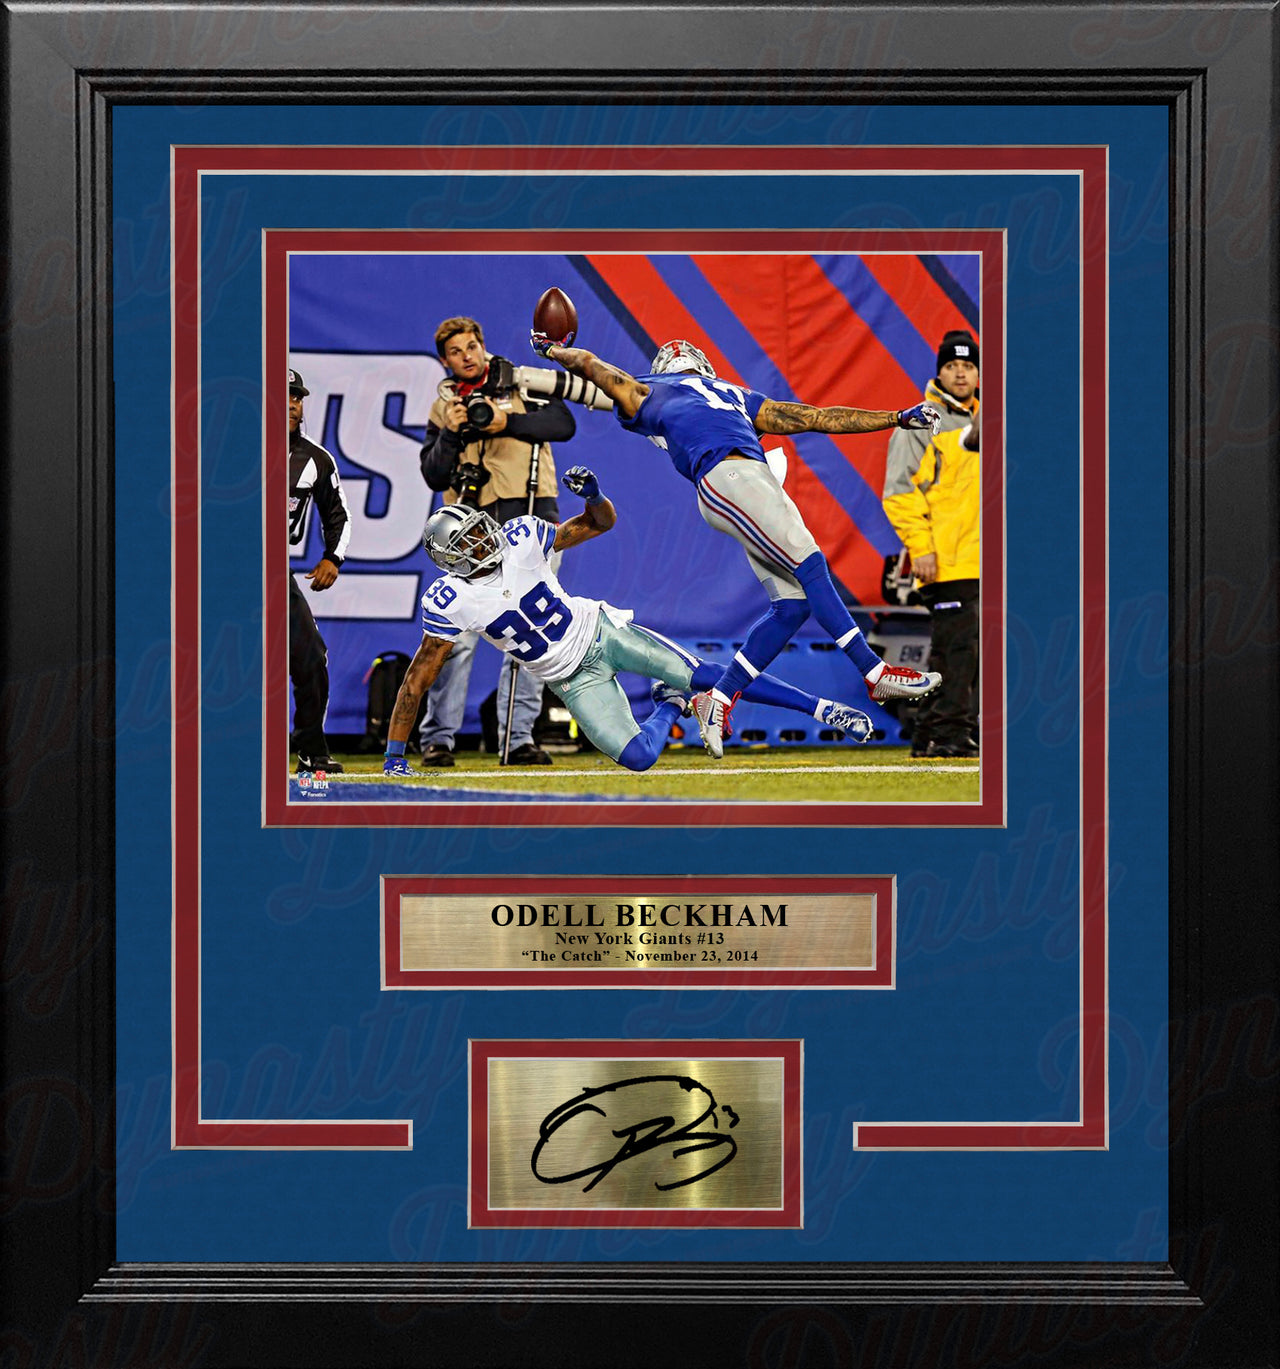 Odell Beckham One-Handed Touchdown Catch New York Giants 8x10 Framed Photo with Engraved Autograph - Dynasty Sports & Framing 